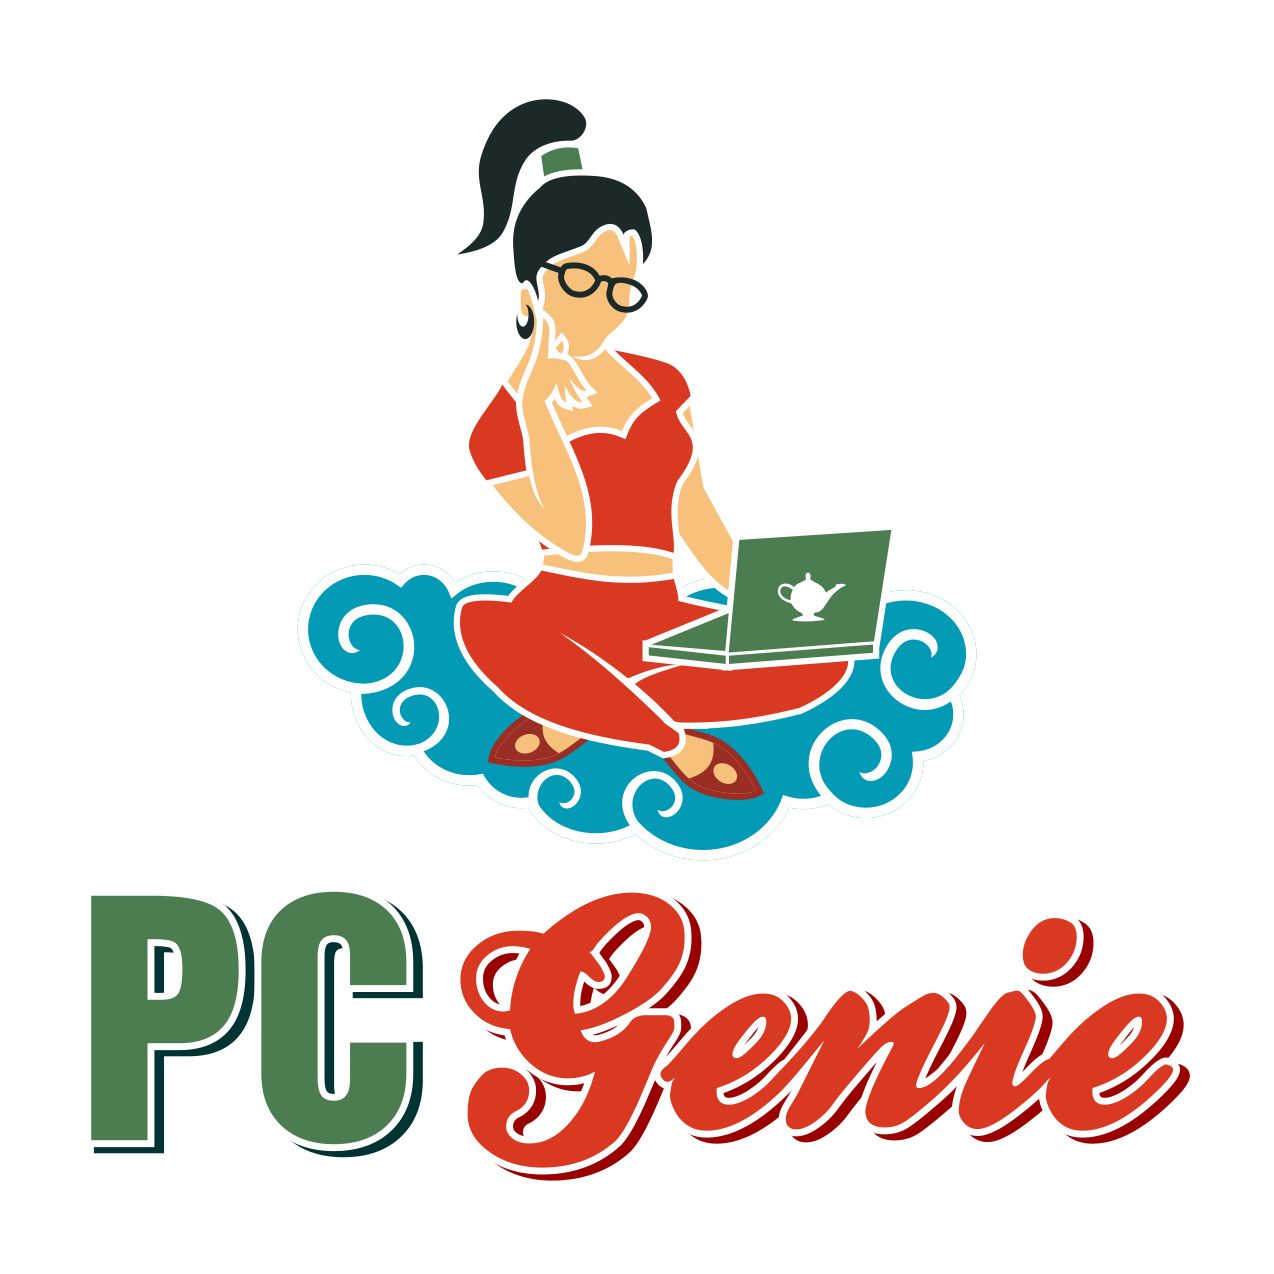 THE BEST COMPUTER AND LAPTOP REPAIR IN AUSTIN. SERVICING BOTH PC AND MAC COMPUTERS.